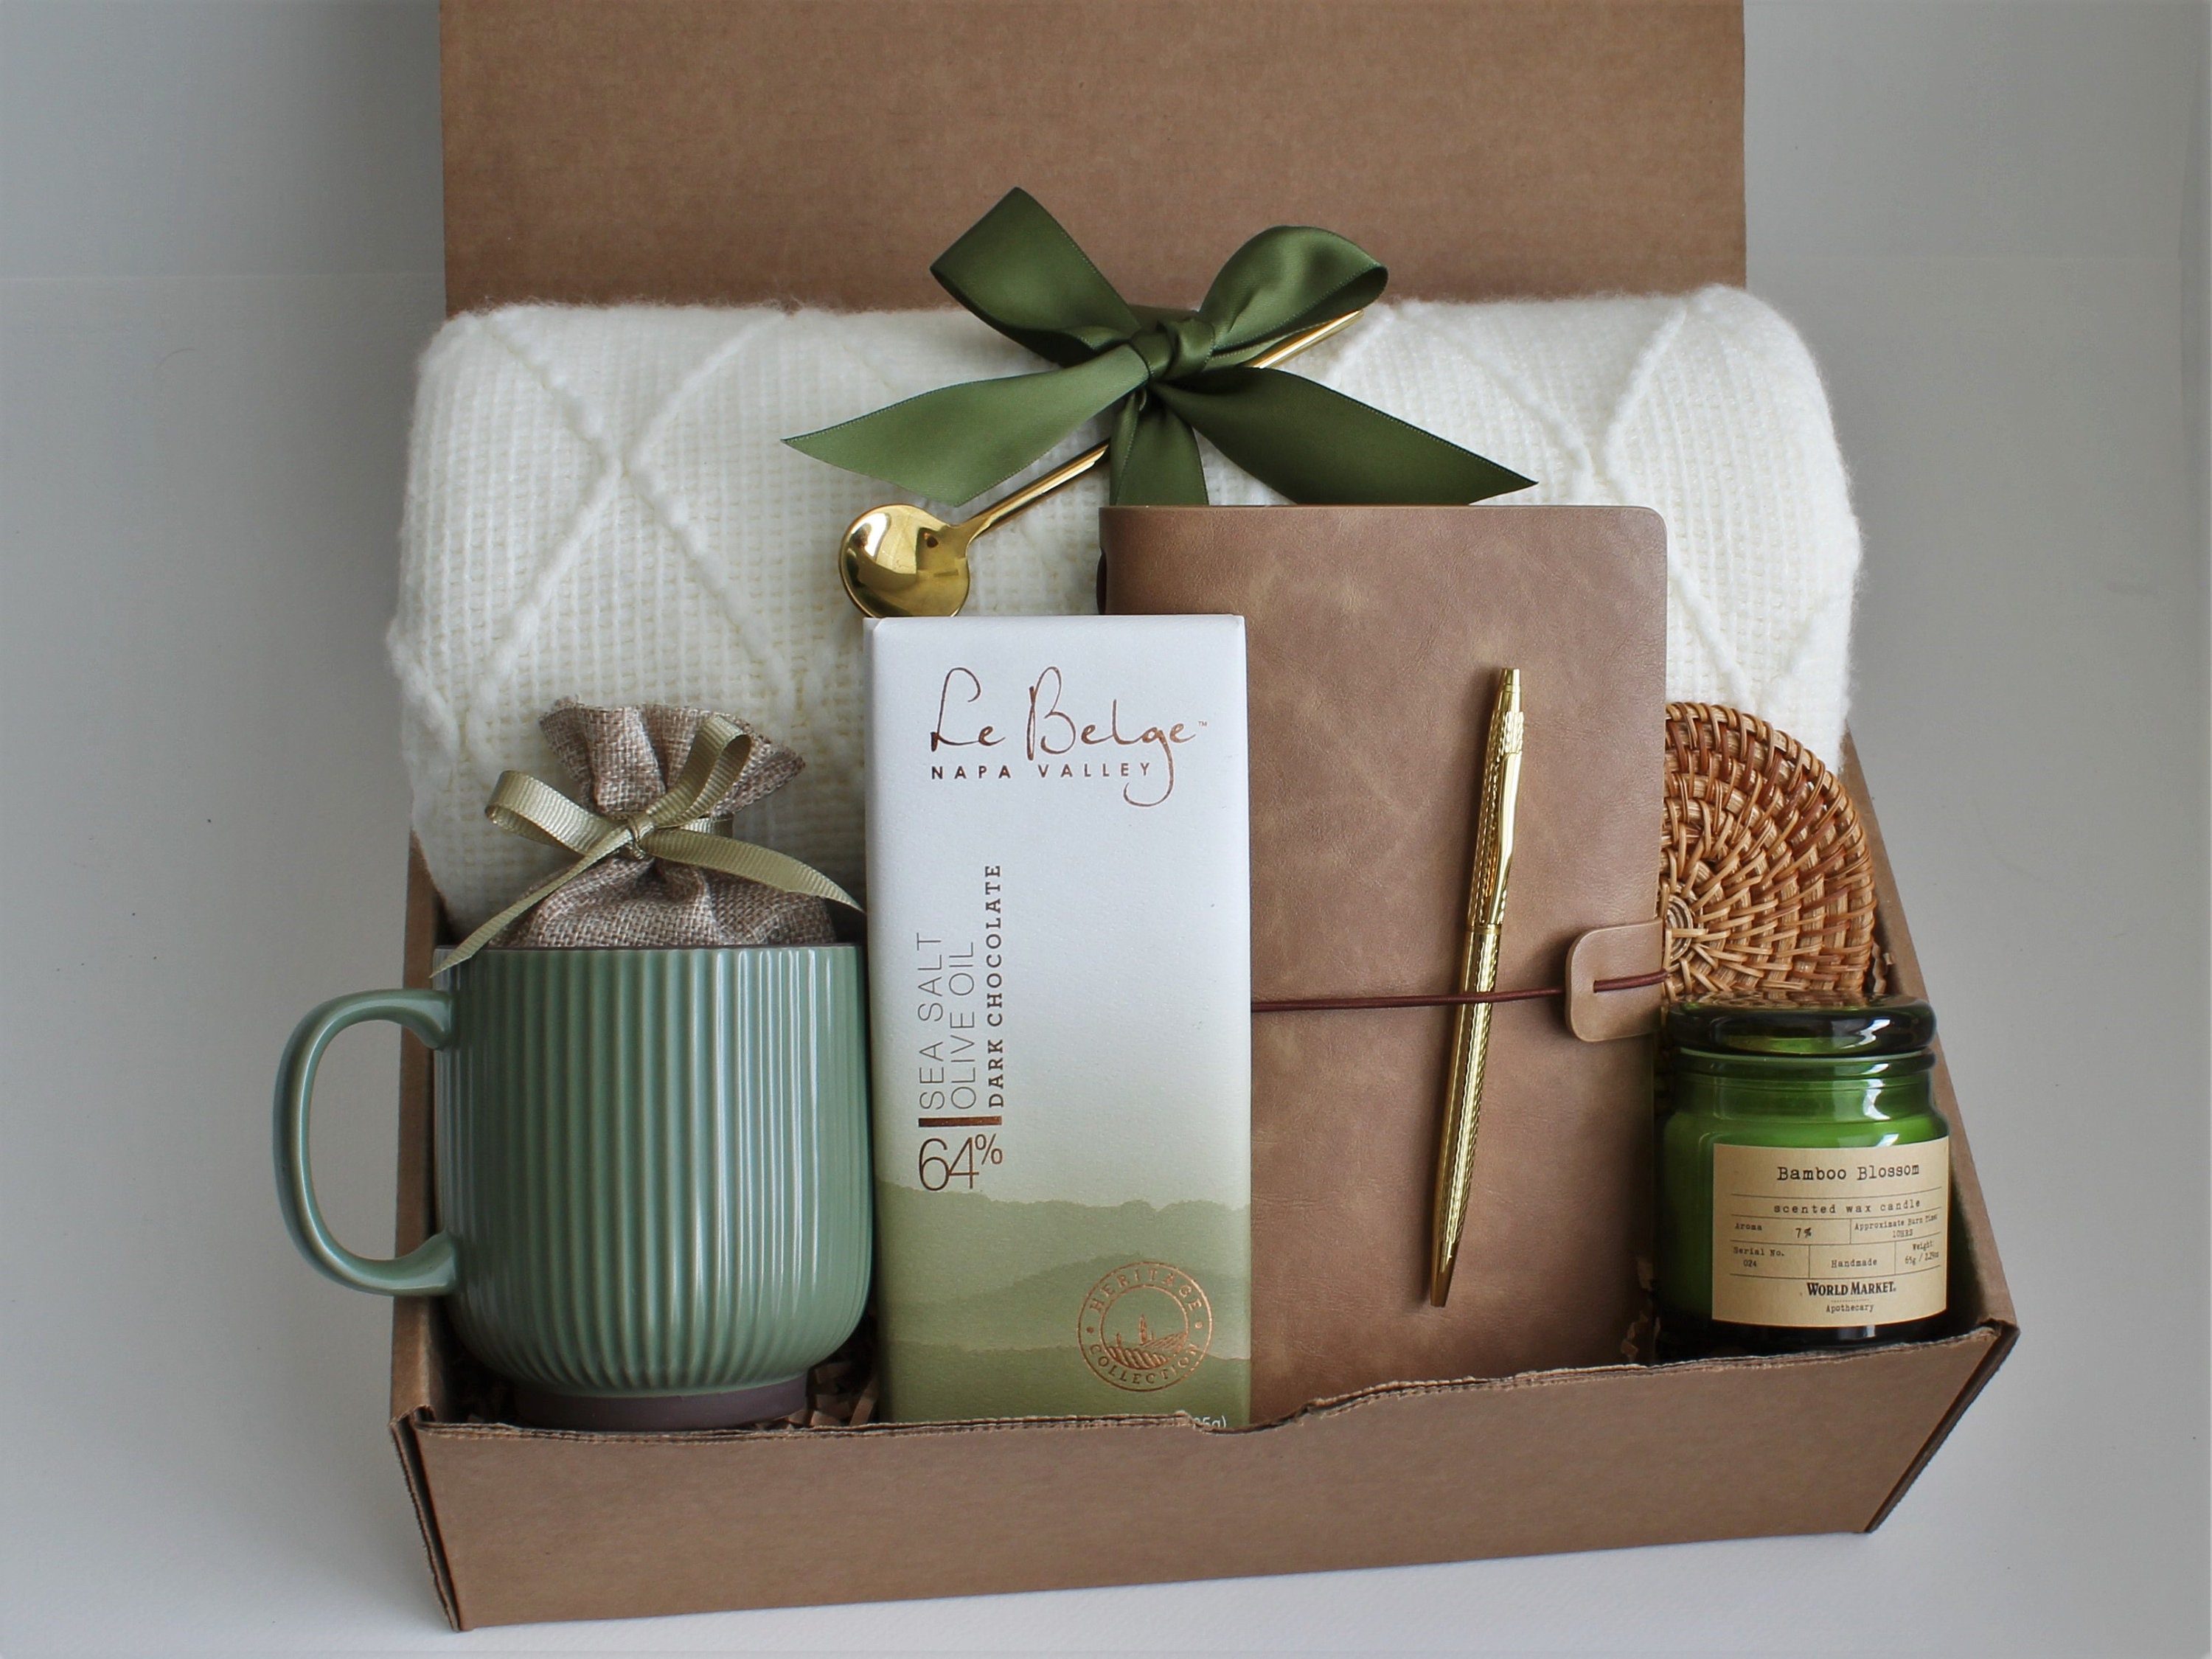 Extra Special Gift Box for Women | Cozy Gift Basket with Blanket, Socks,  Succulent | Get Well Gift, Thinking Of You Care Package for Her